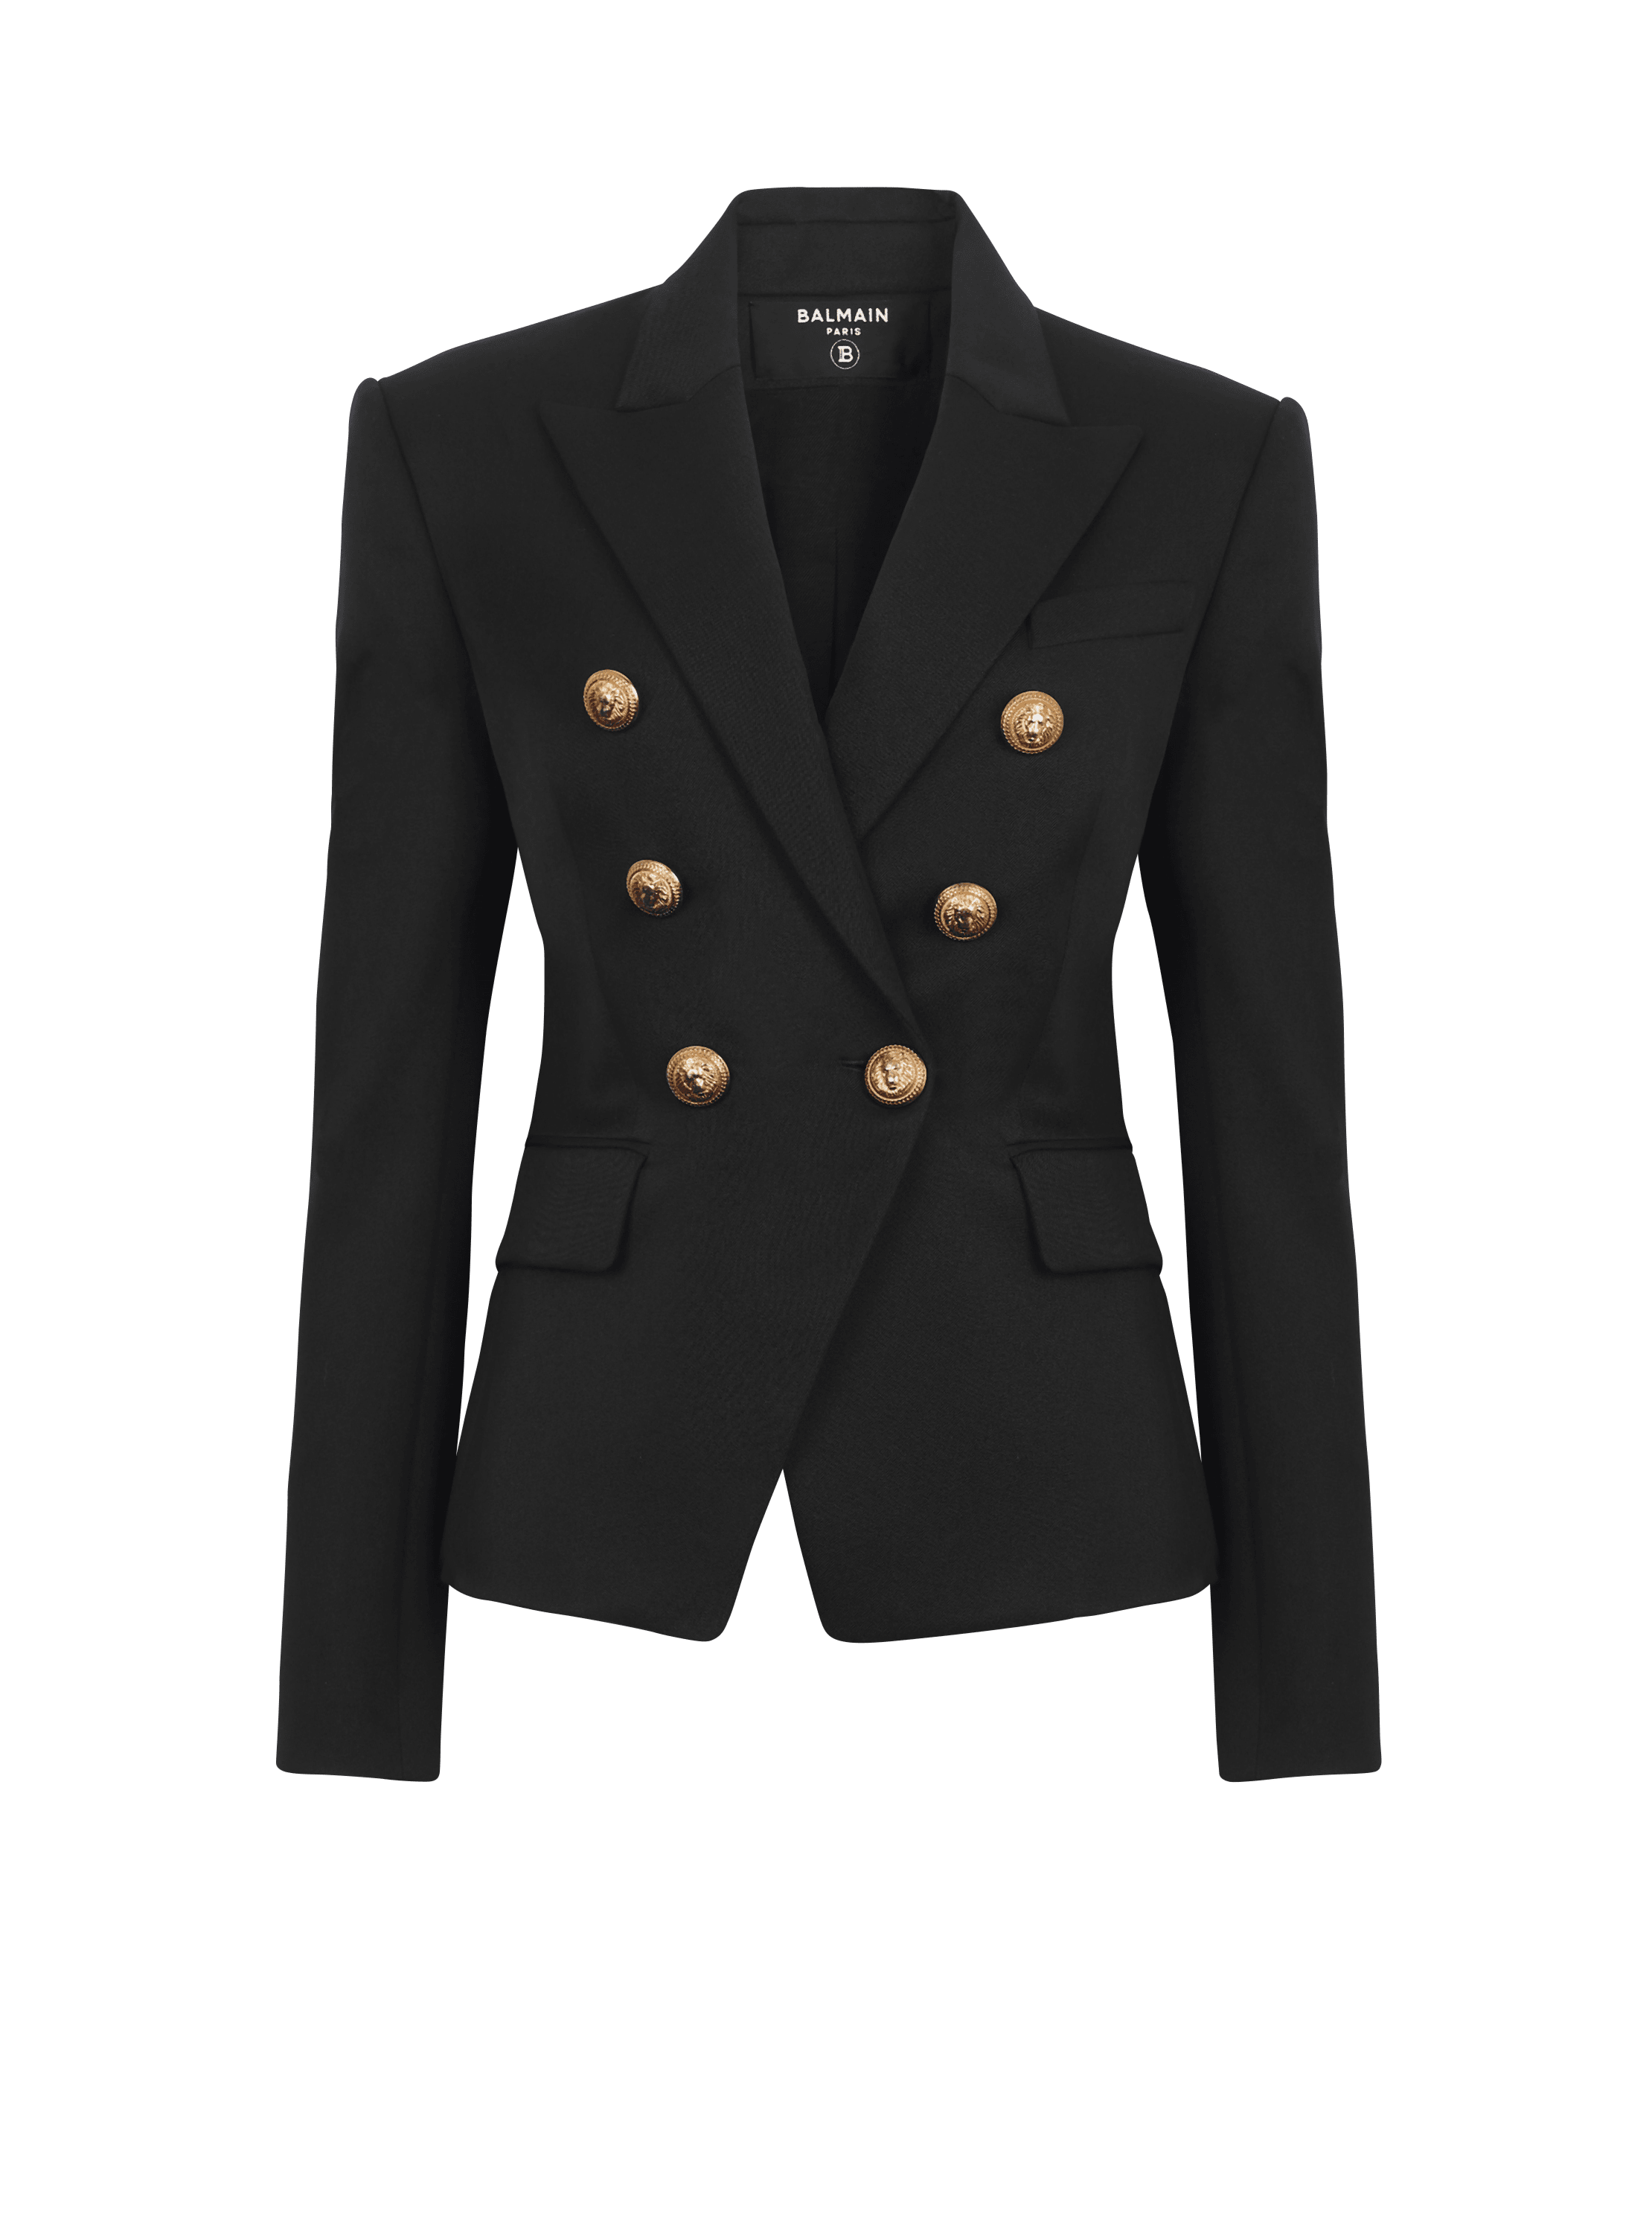 Wool double-breasted jacket